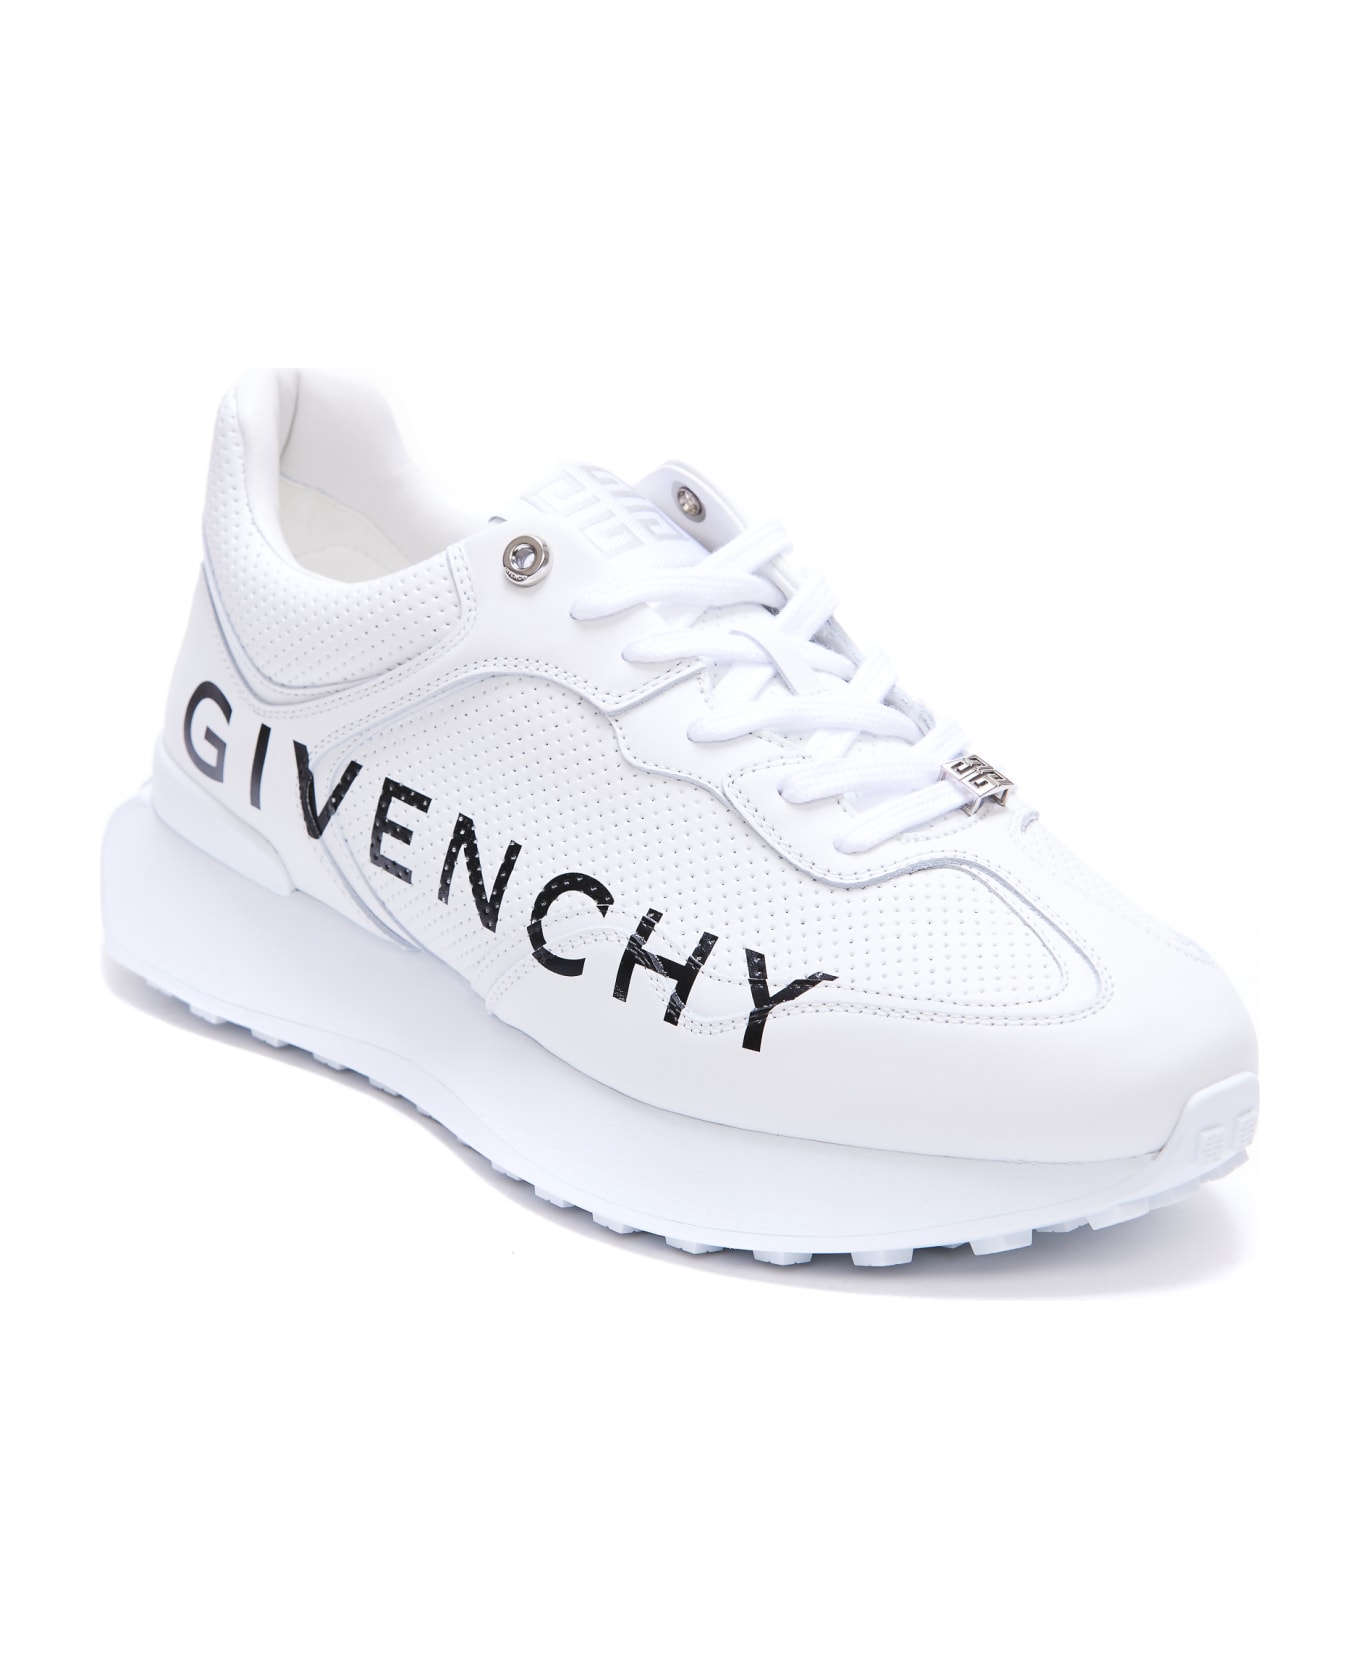 Givenchy Runner Sneakers - BIANCO